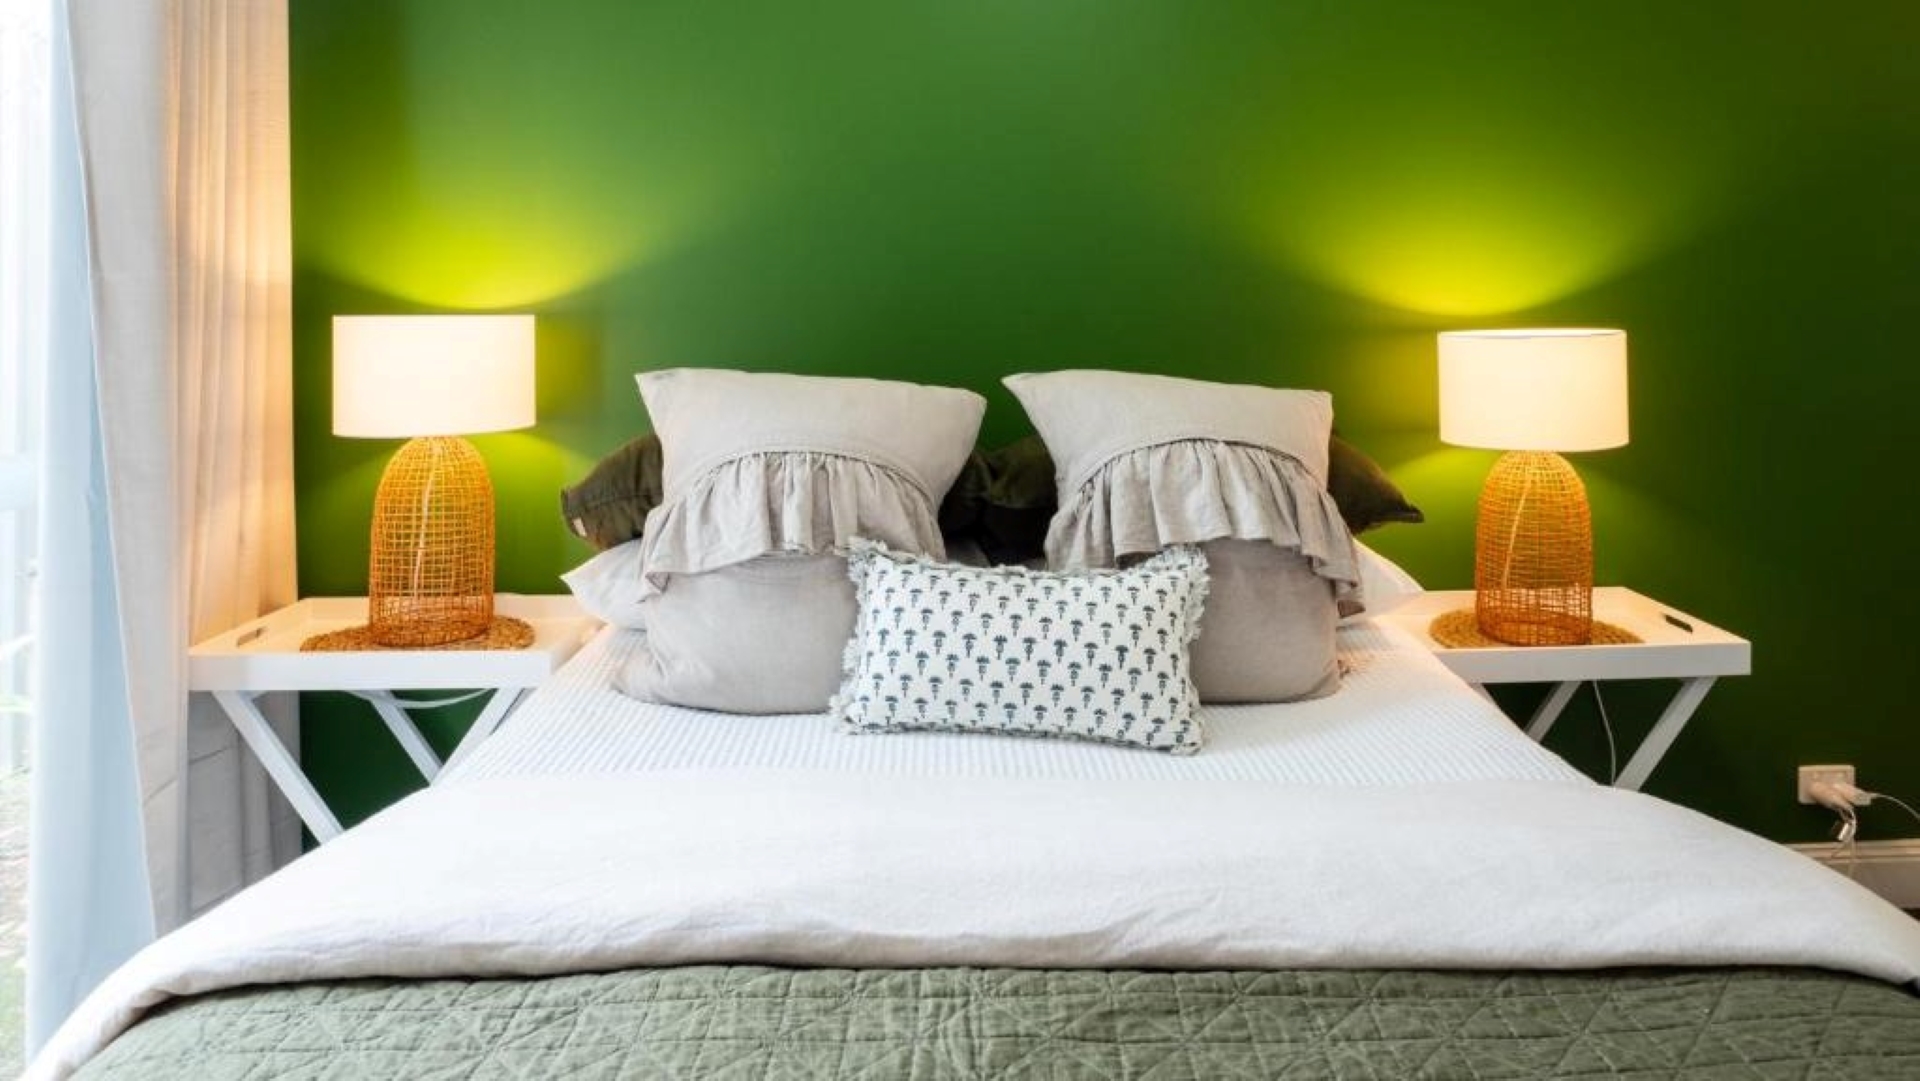 Image is of a queen sized bed with scatter cushions and green feature wall behind